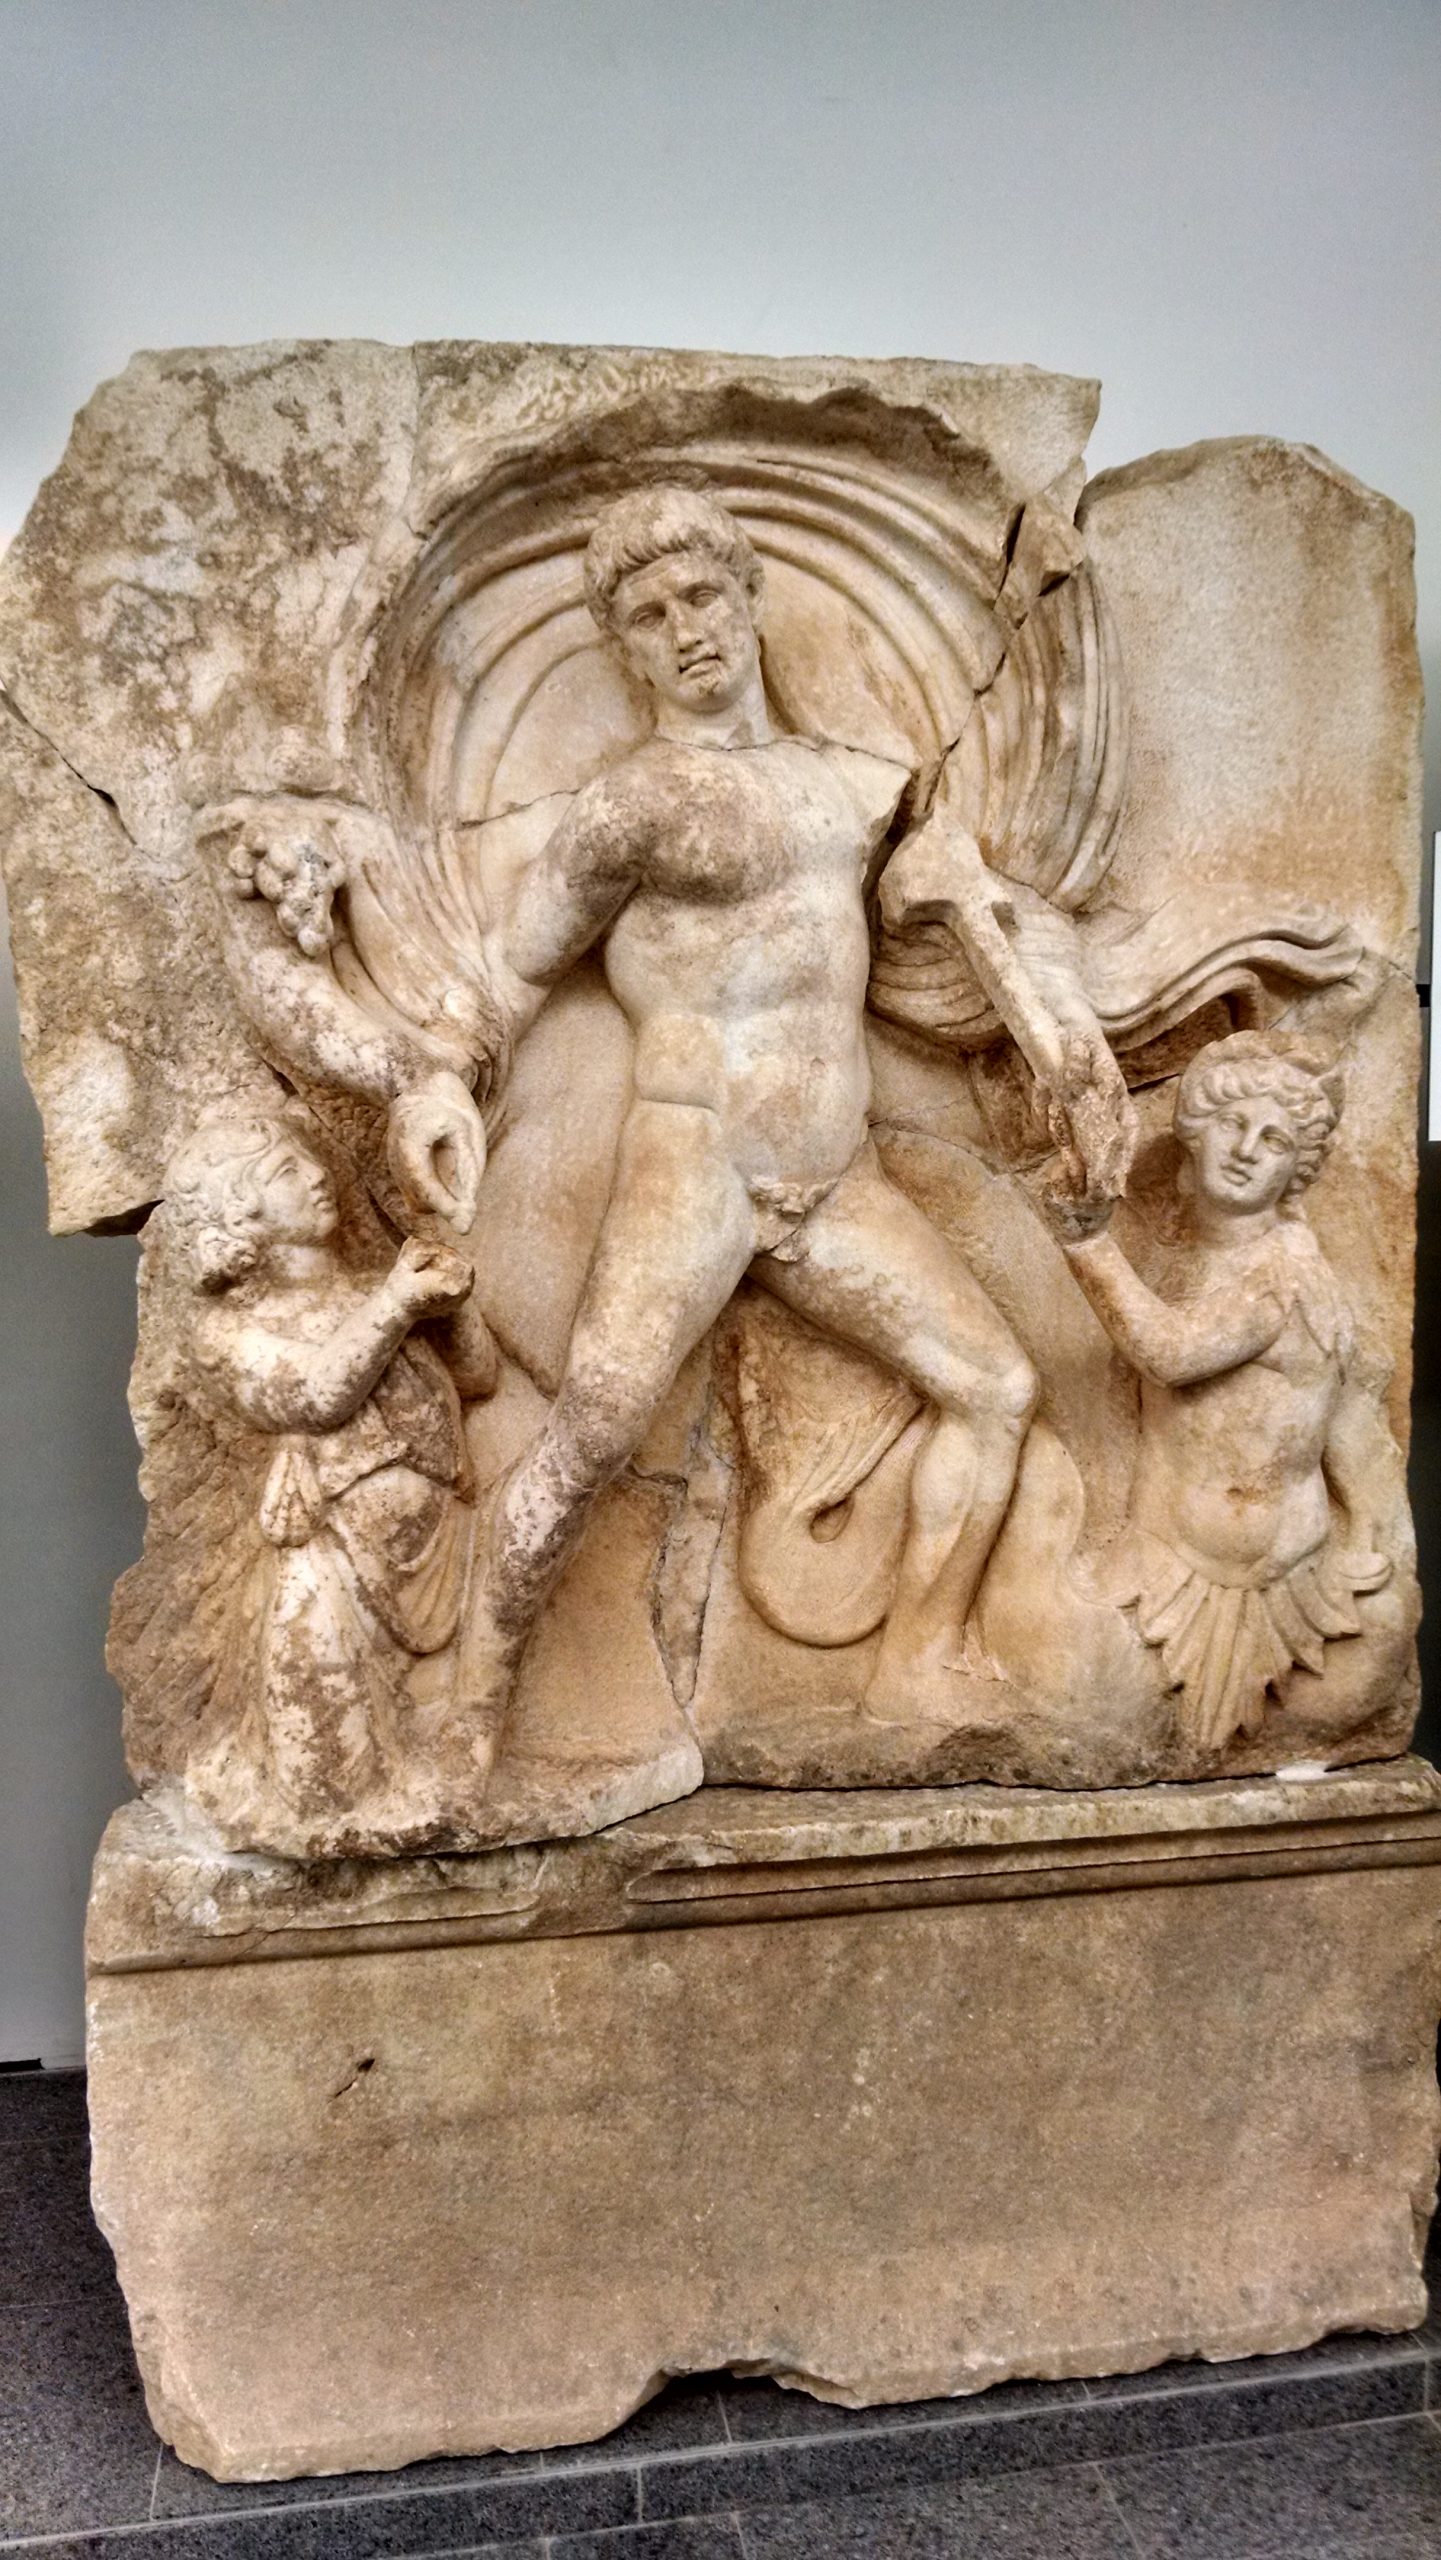 Stone relief of the Emperor Claudius, depicted as a god. Full frontal, nude, flanked by two small, female figures.